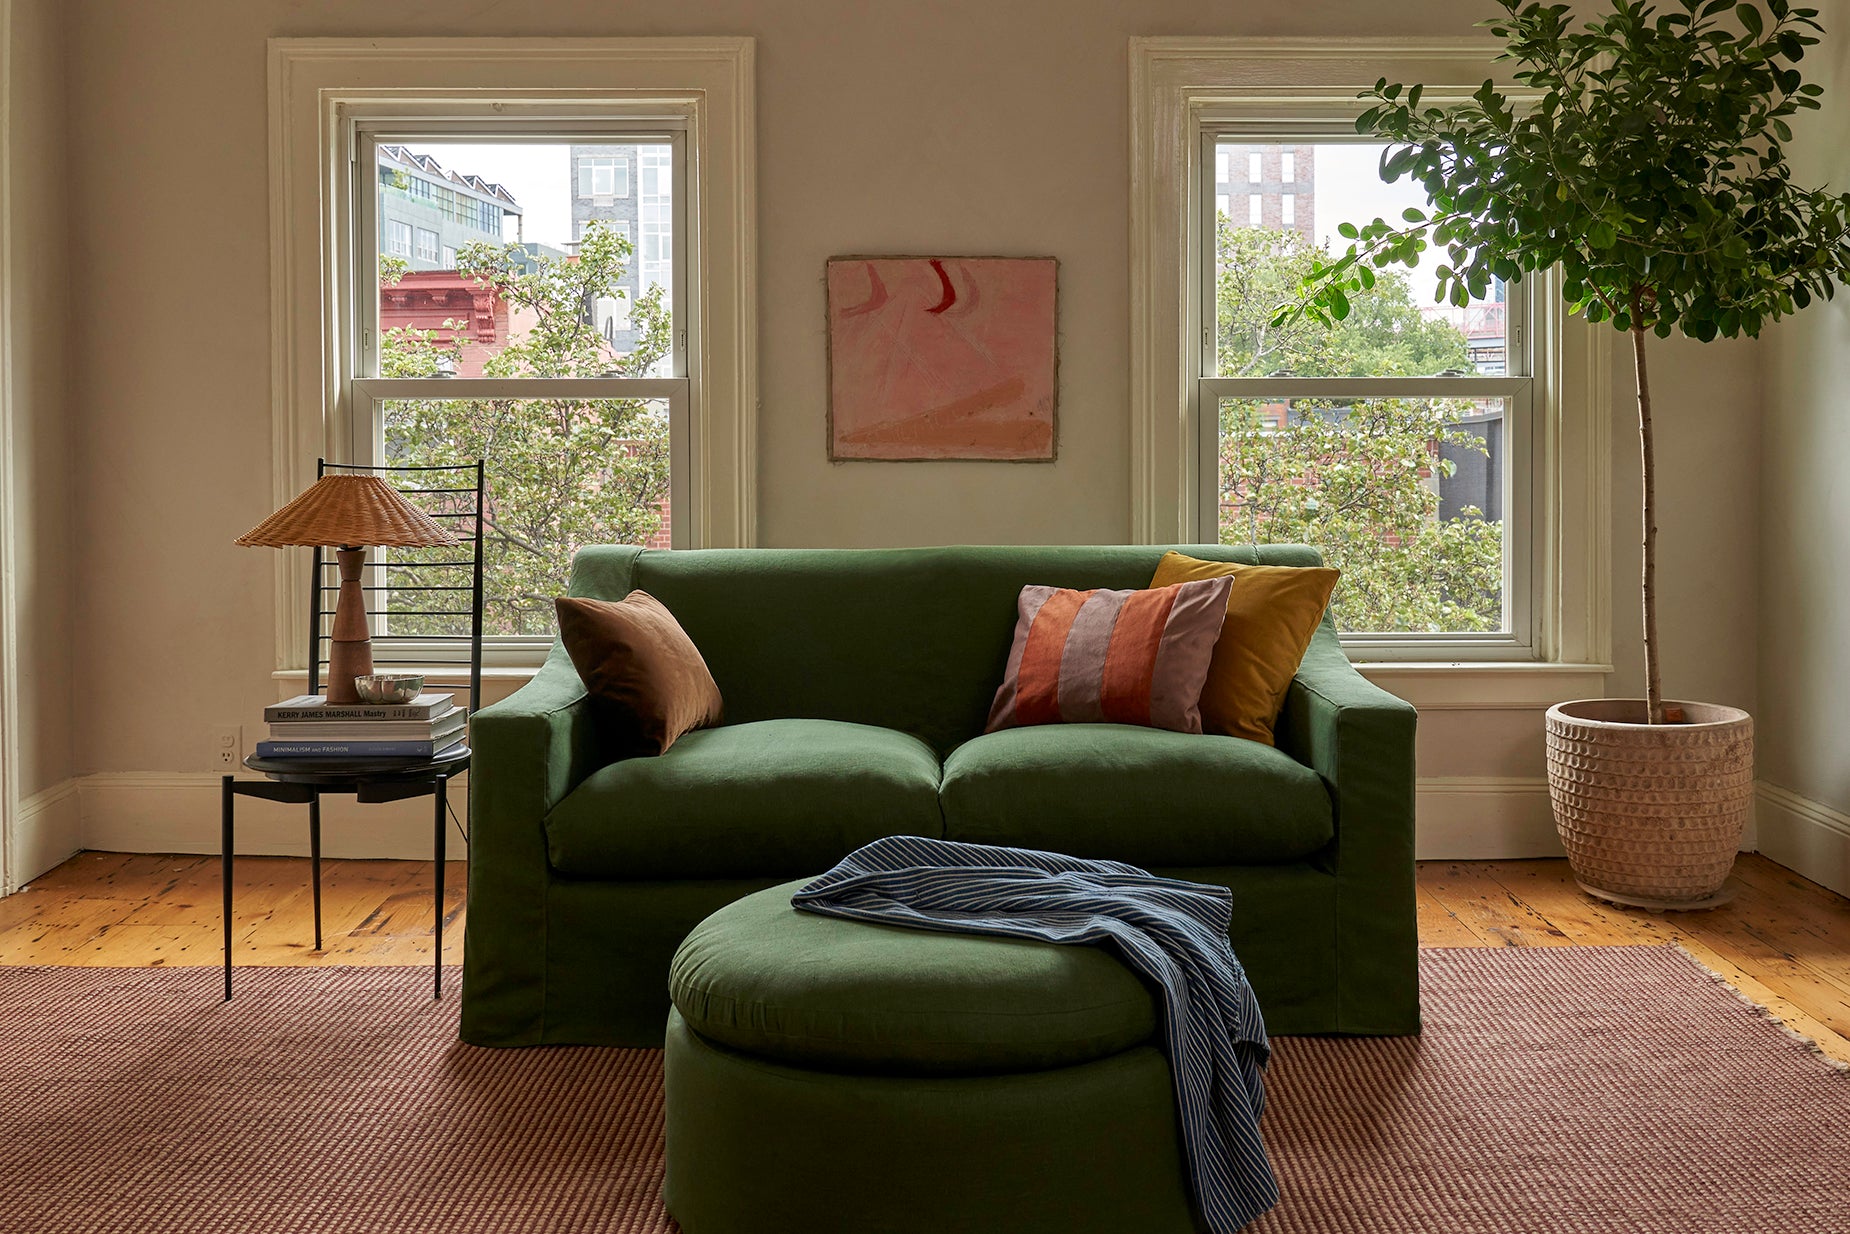 A green loveseat and ottoman in an apartment